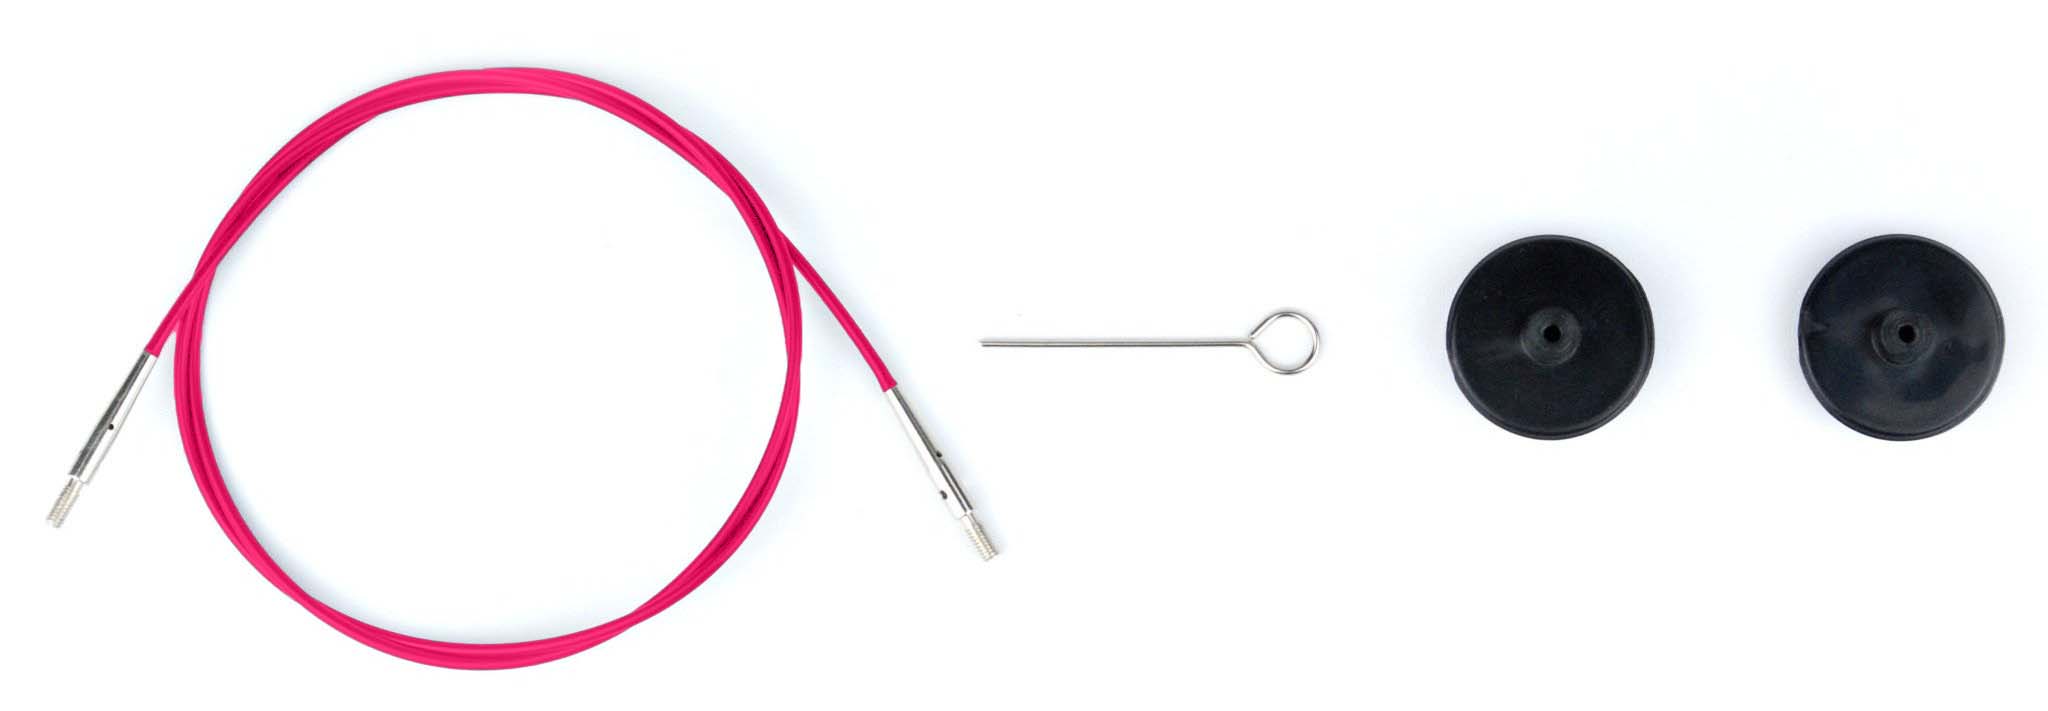 LYKKE Cords for 5 Interchangeable Knitting Needles – The Needle Store